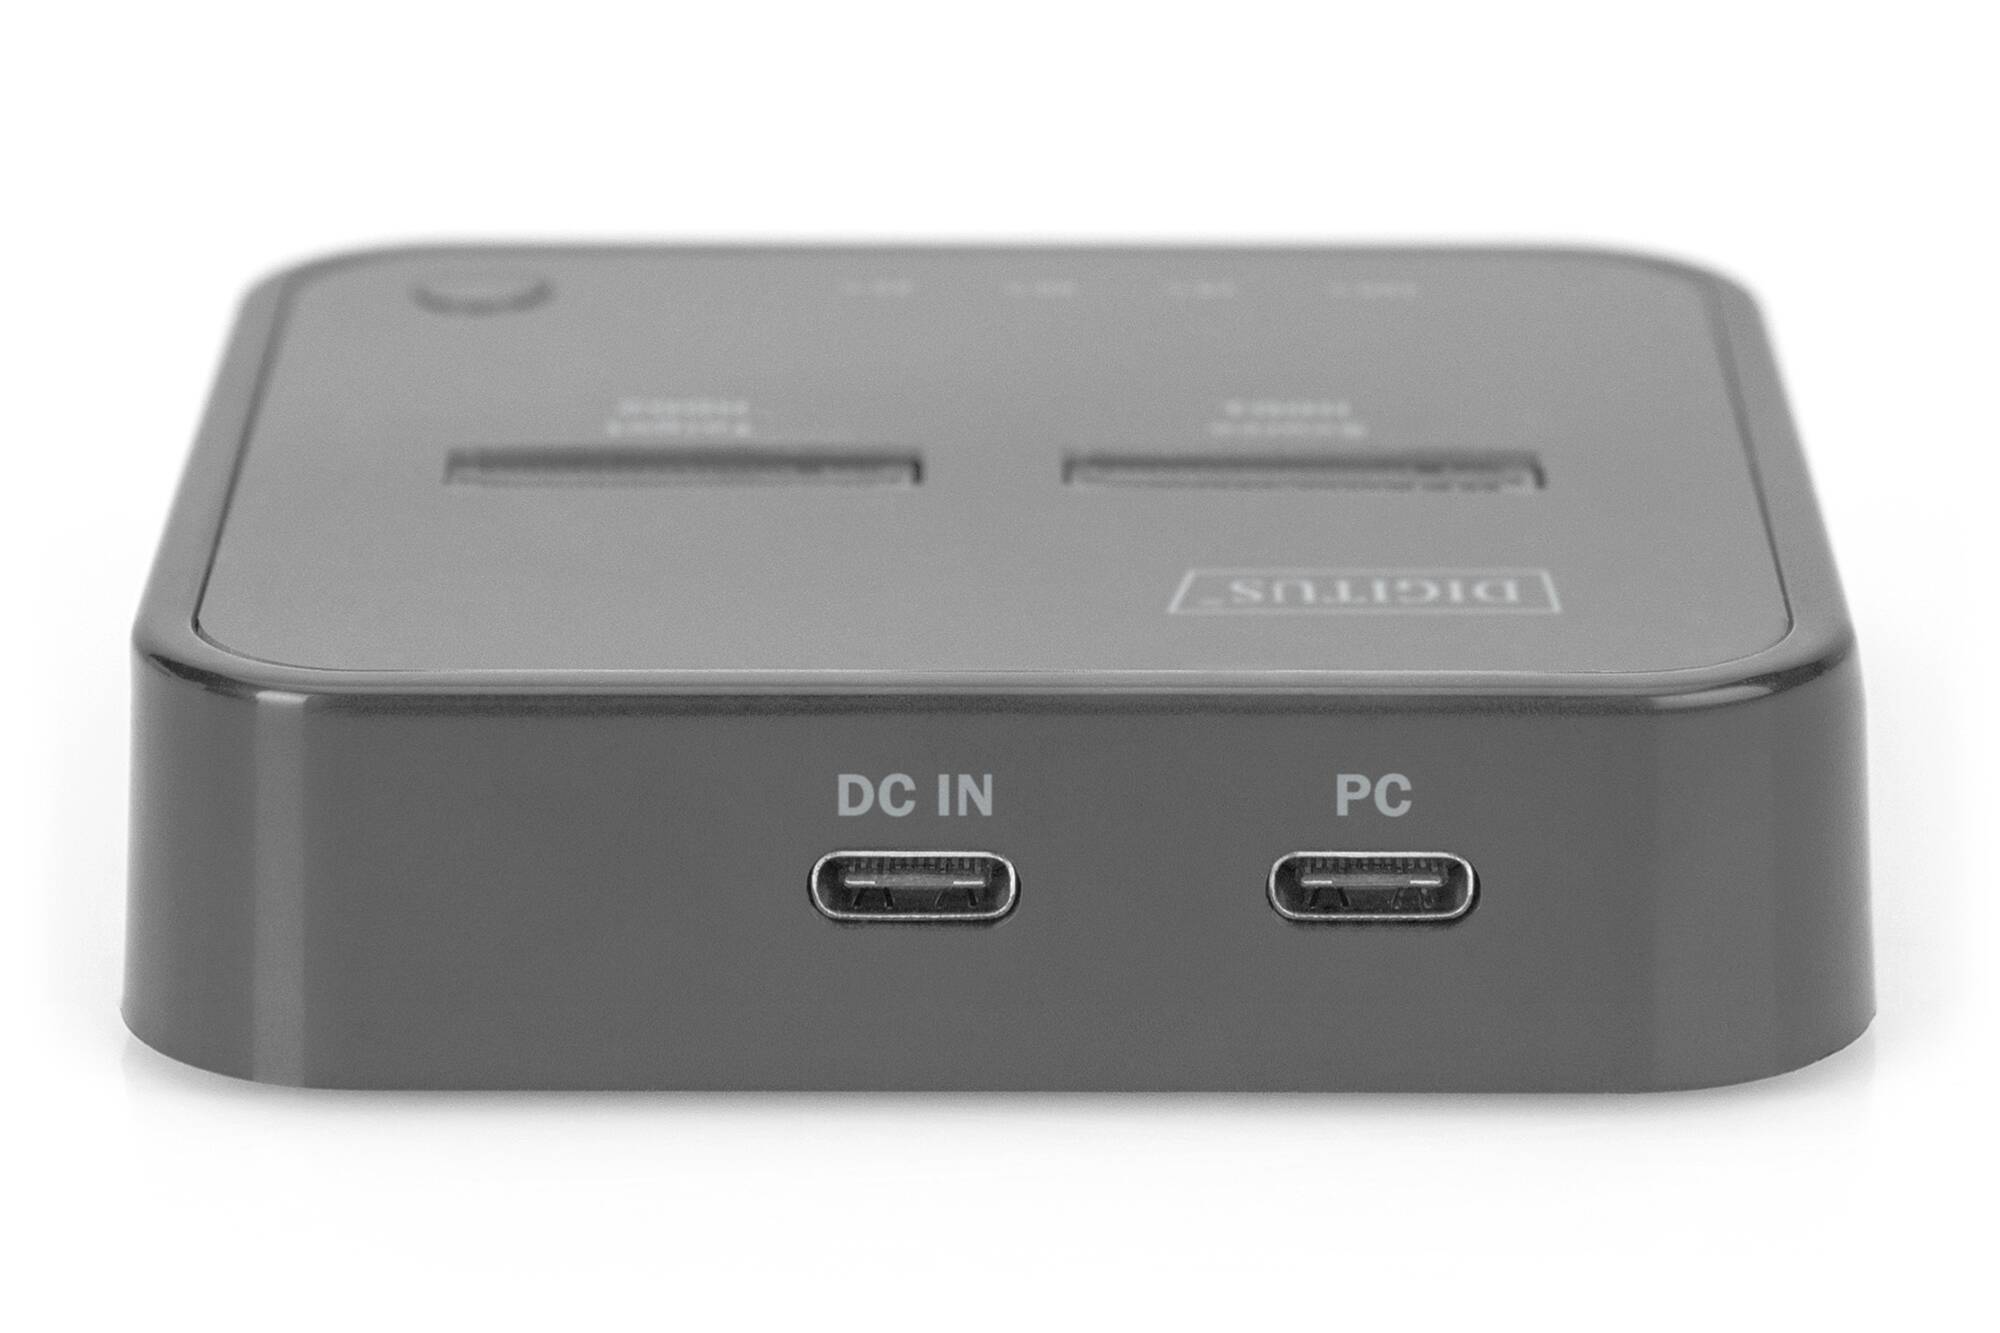 Dual M.2 NVMe SSD Docking Station with Offline Clone Function, USB-Cª